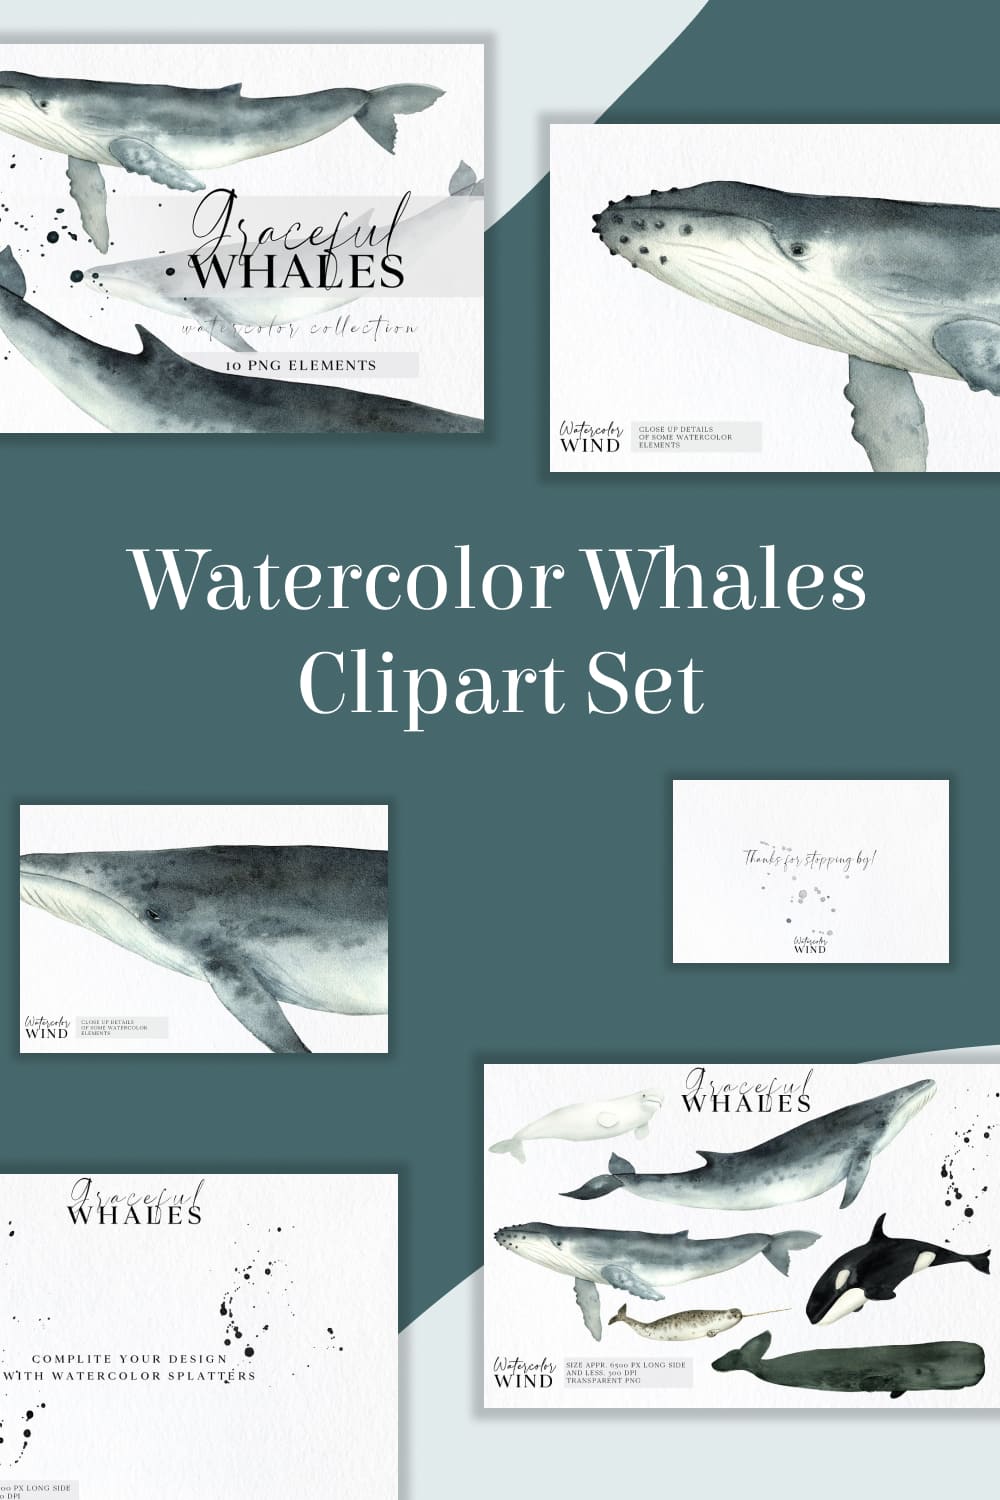 watercolor whales clipart collection.